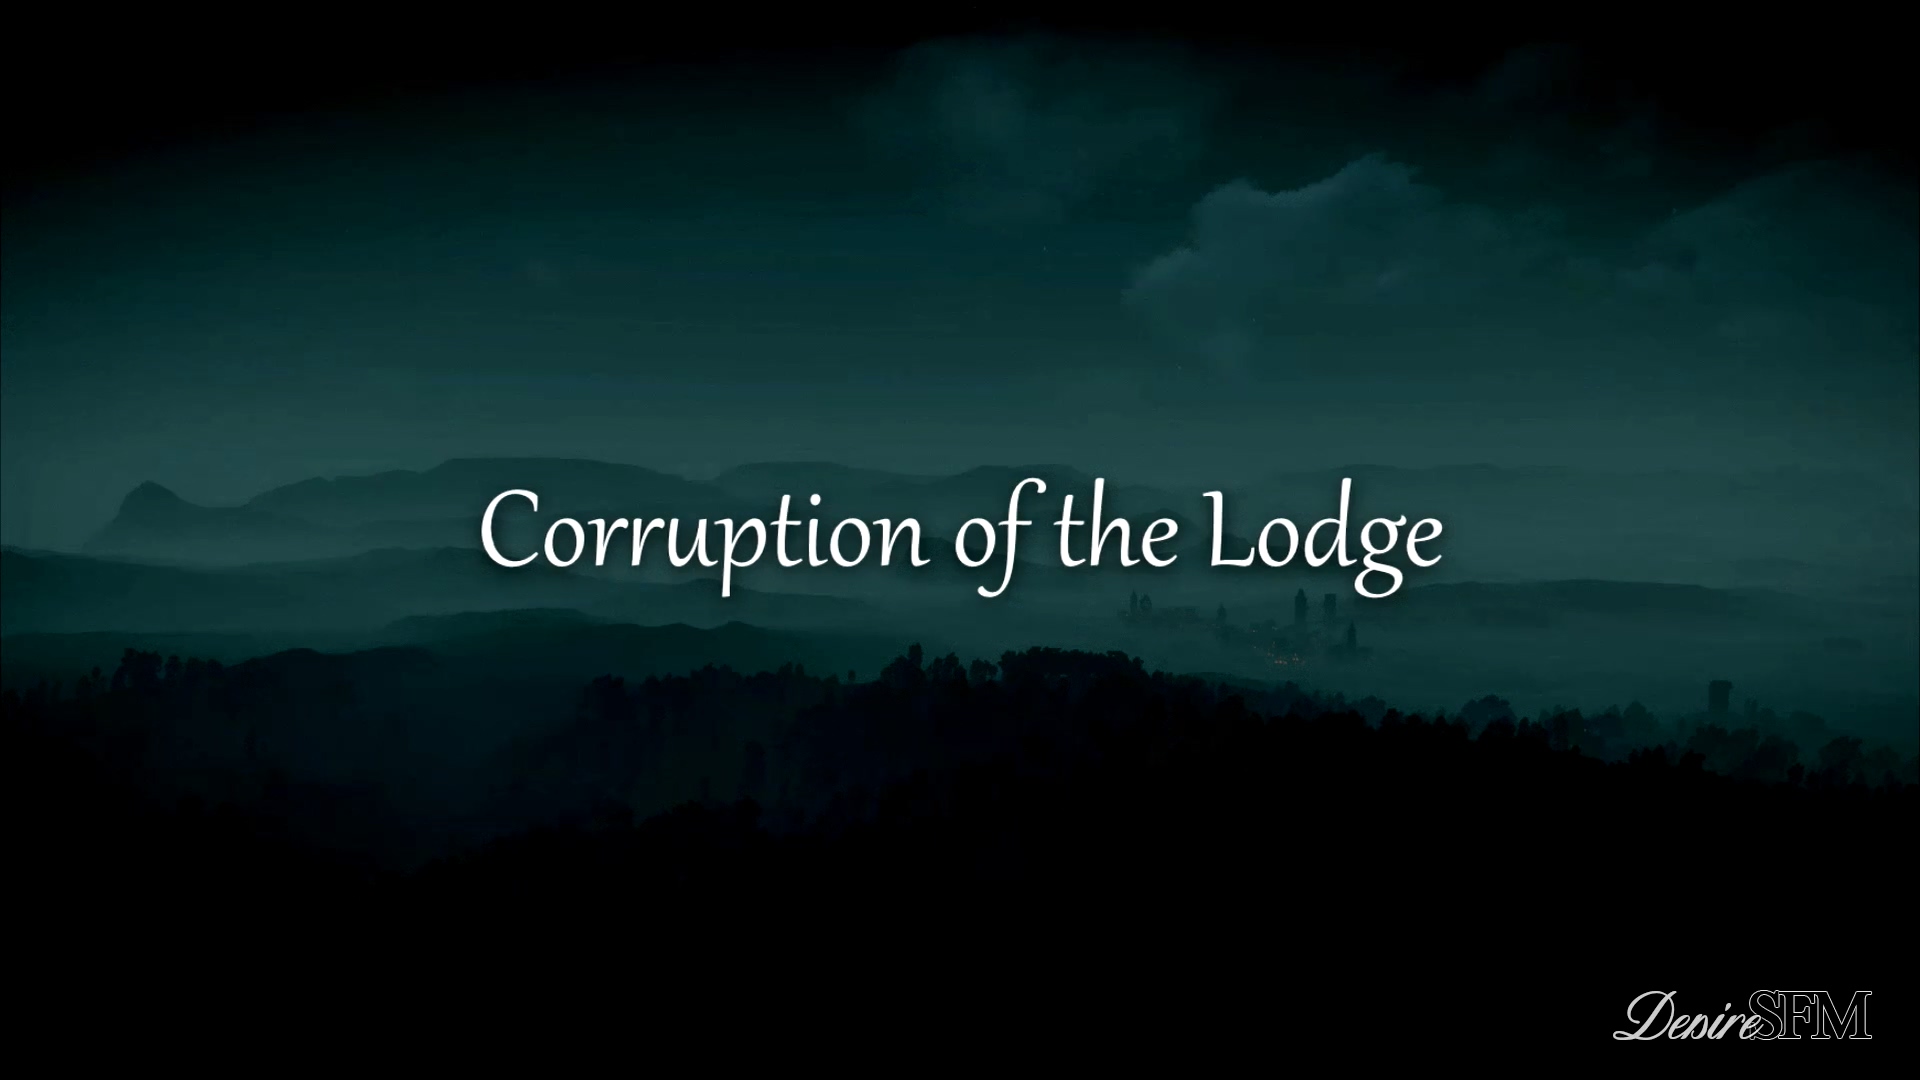 Corruption of the lodge